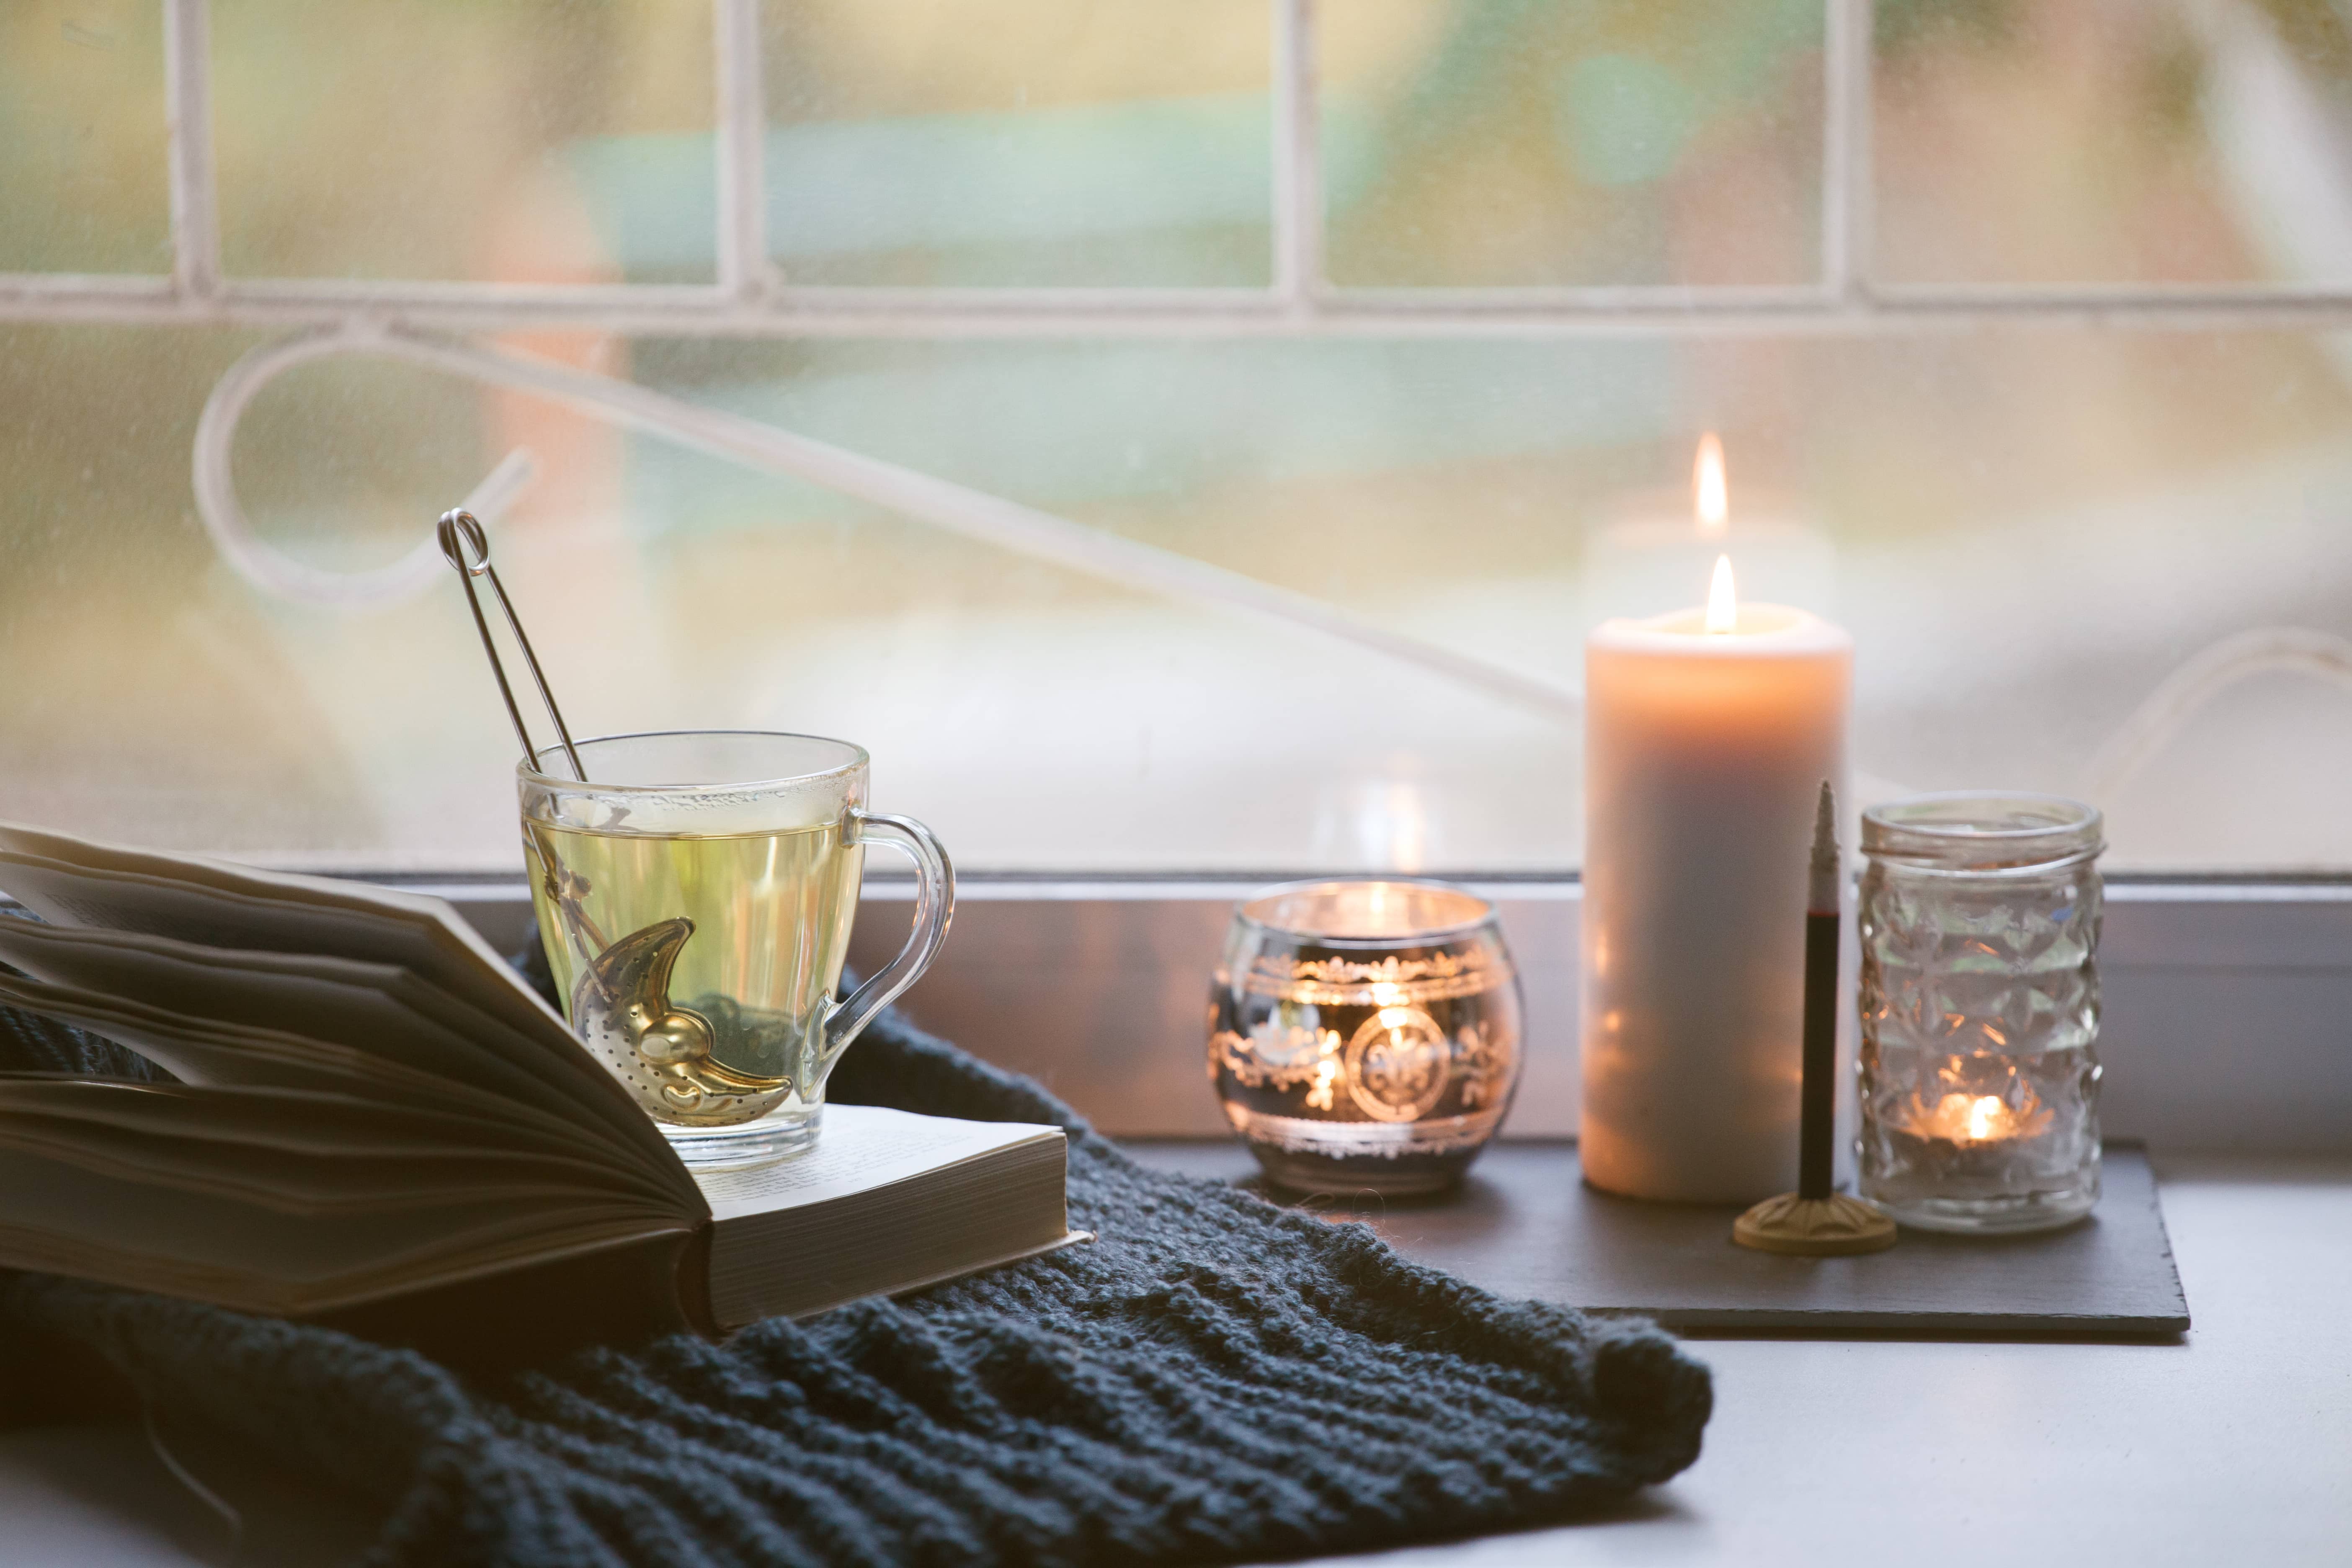 A beautiful lit candle, book and tea reading for a mom's self-care!